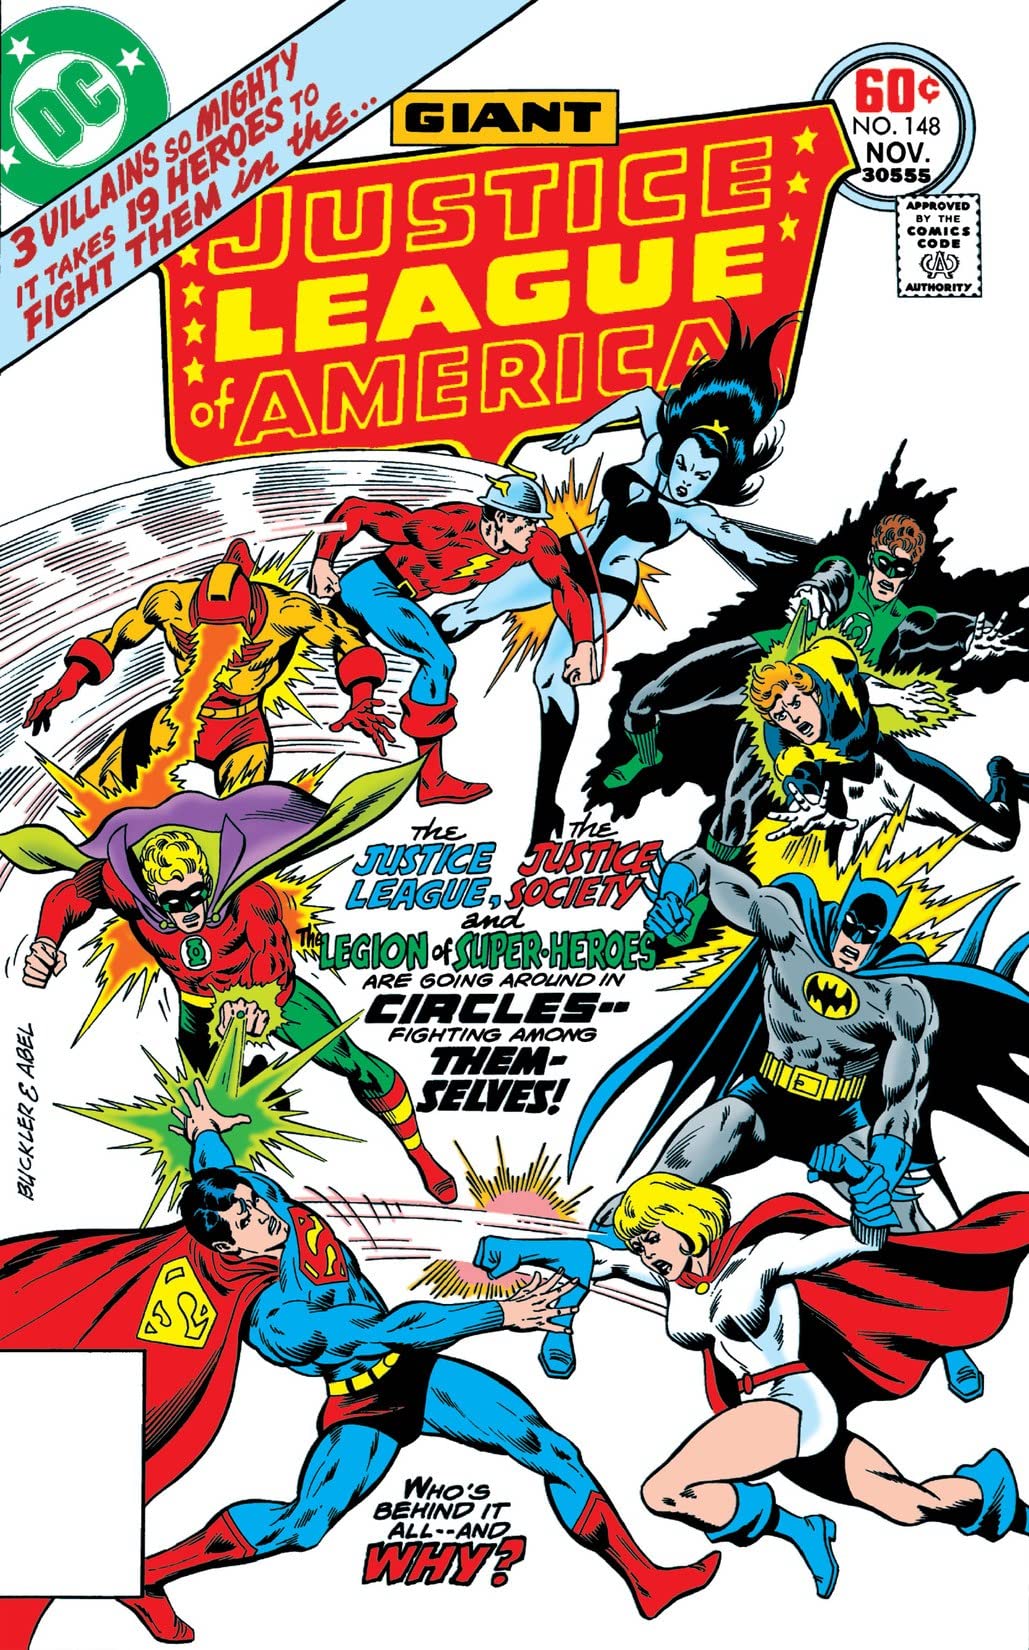 Justice League of America #148 cover by Rich Buckler and Jack Abel